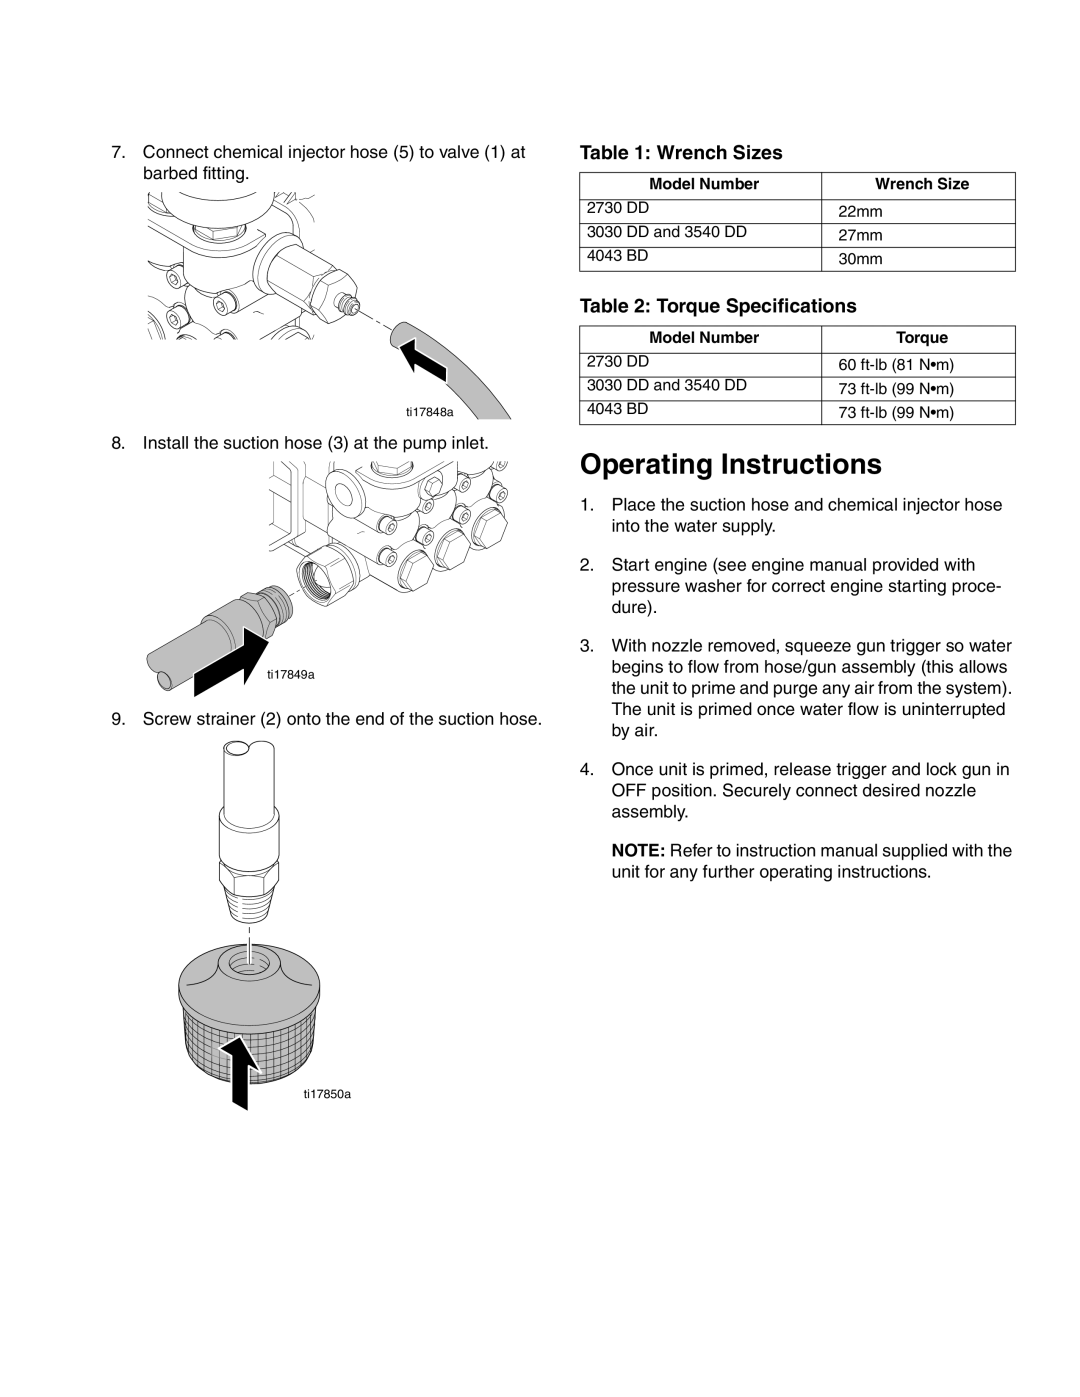 Graco 24F215, 24F214 important safety instructions Operating Instructions, Wrench Sizes, Torque Specifications 